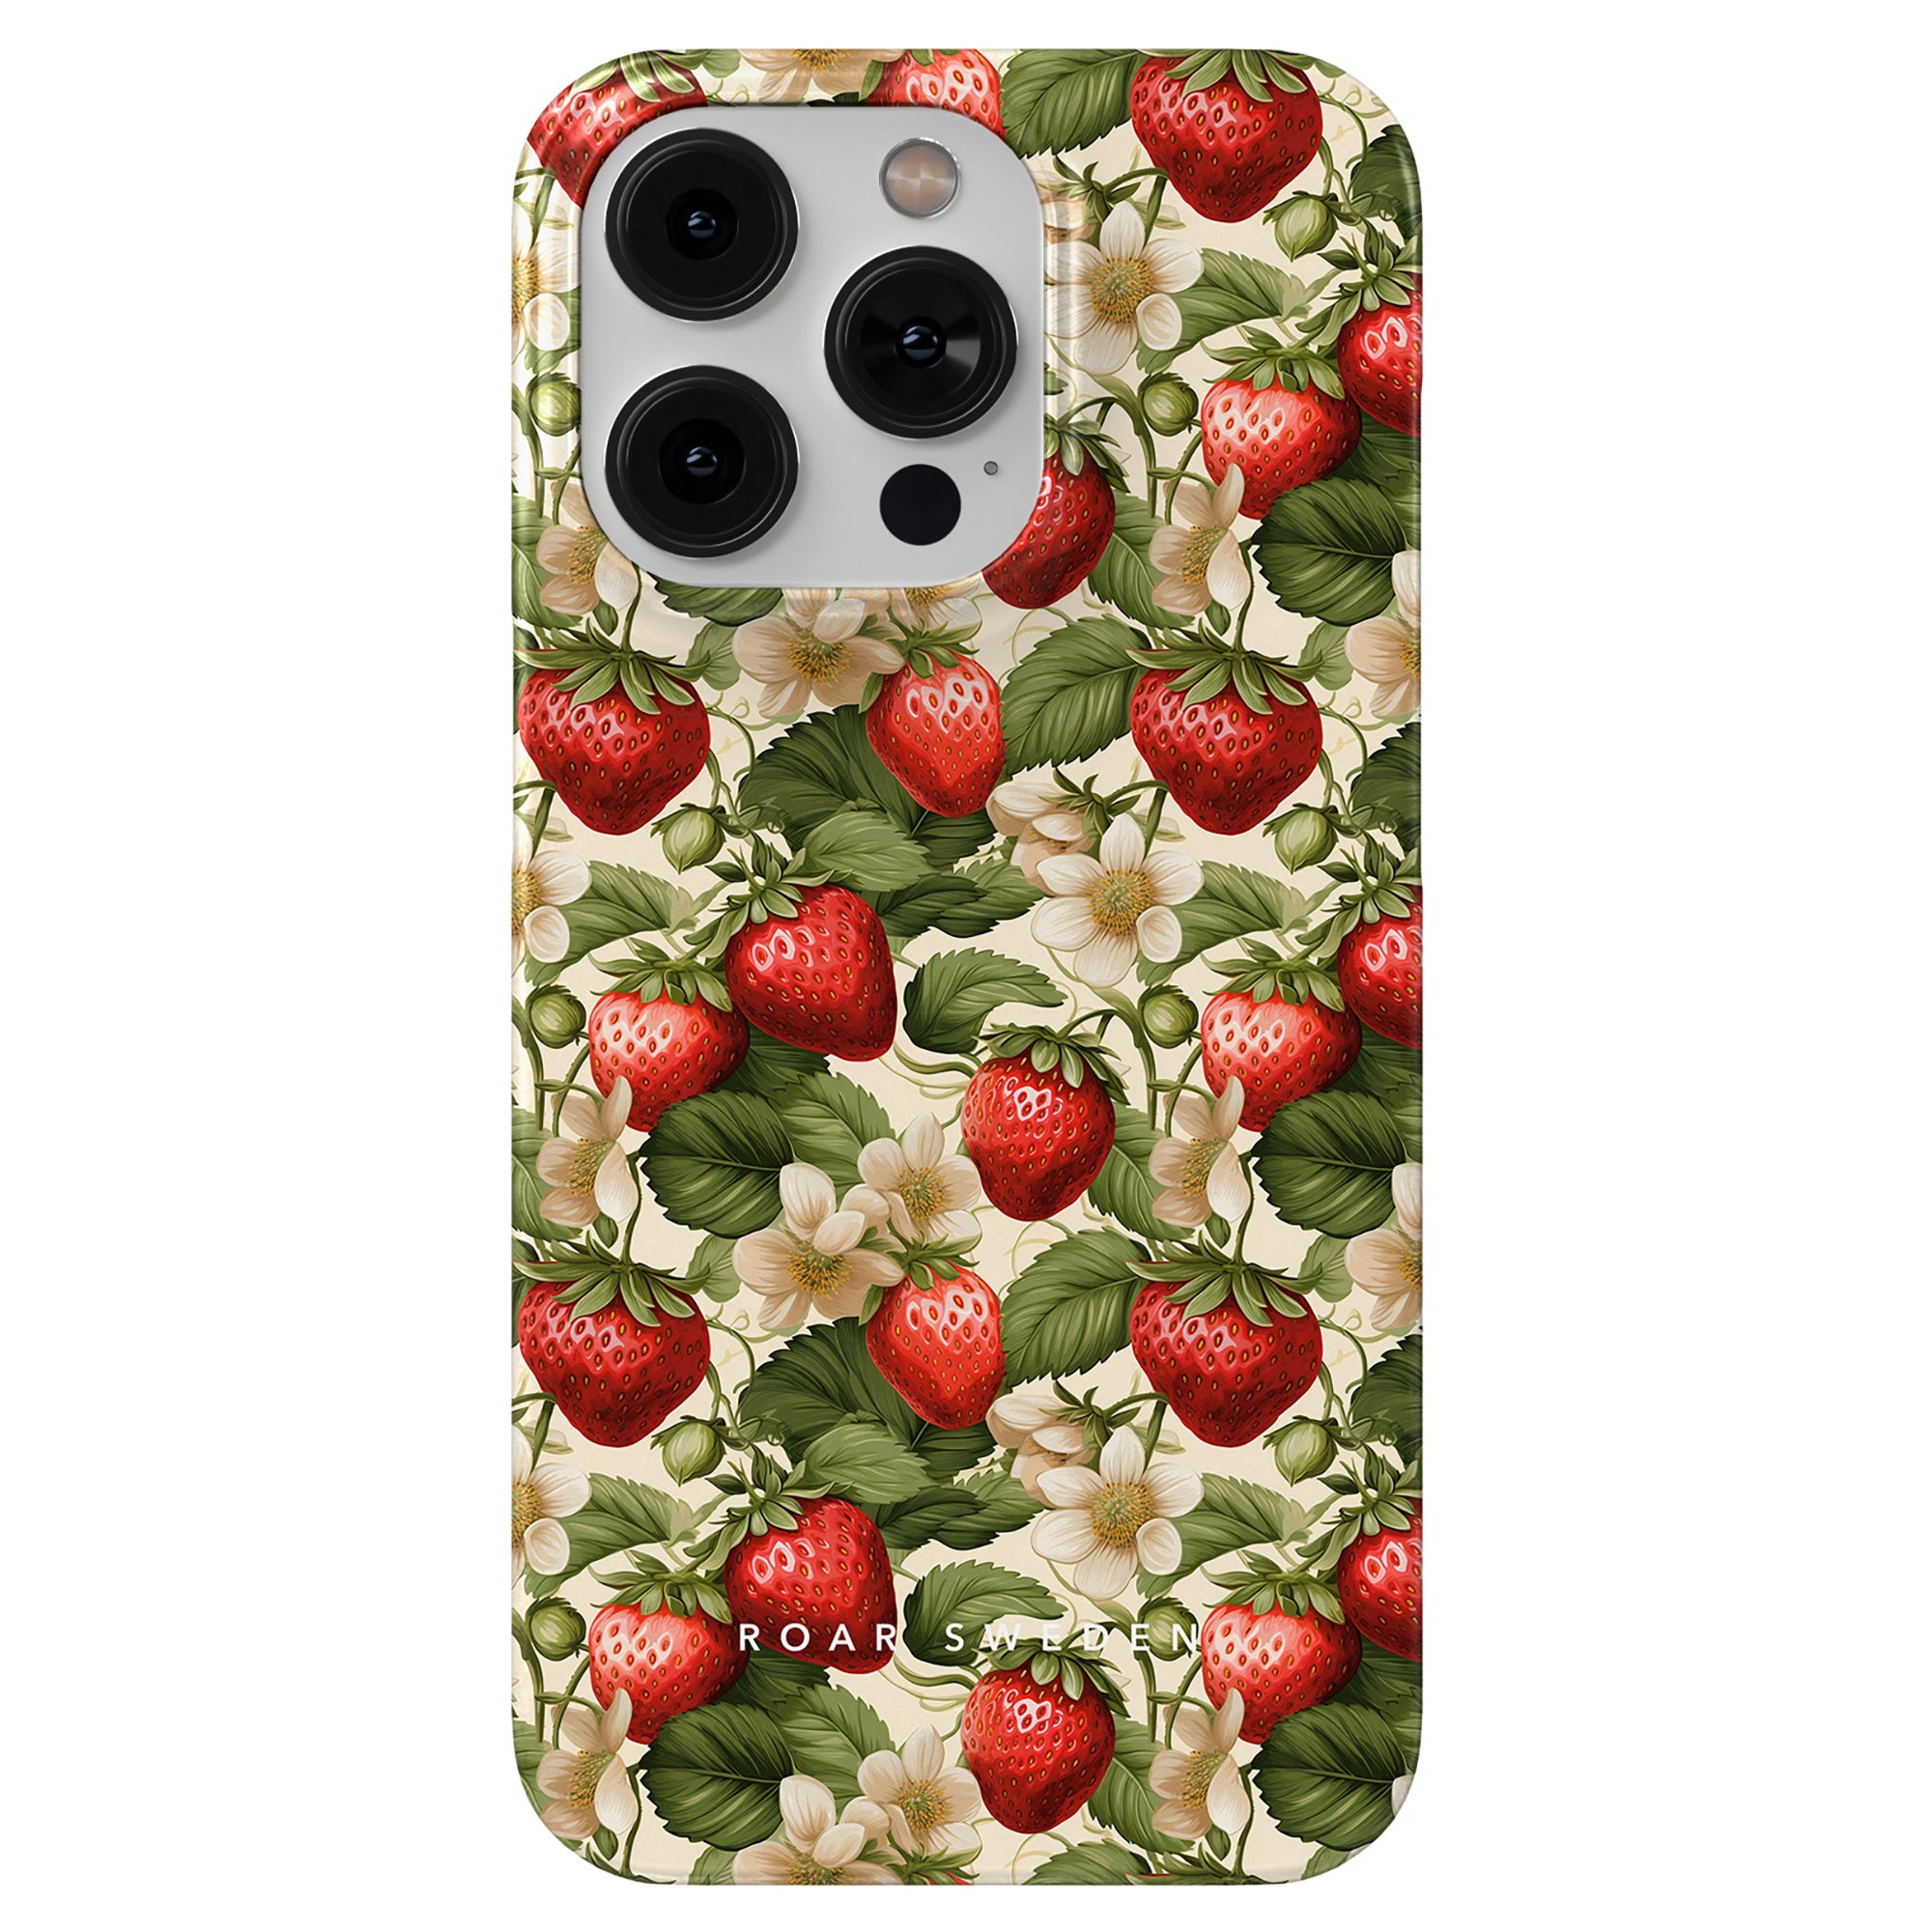 Strawberries and flower patterned Slim case with activity tracking.